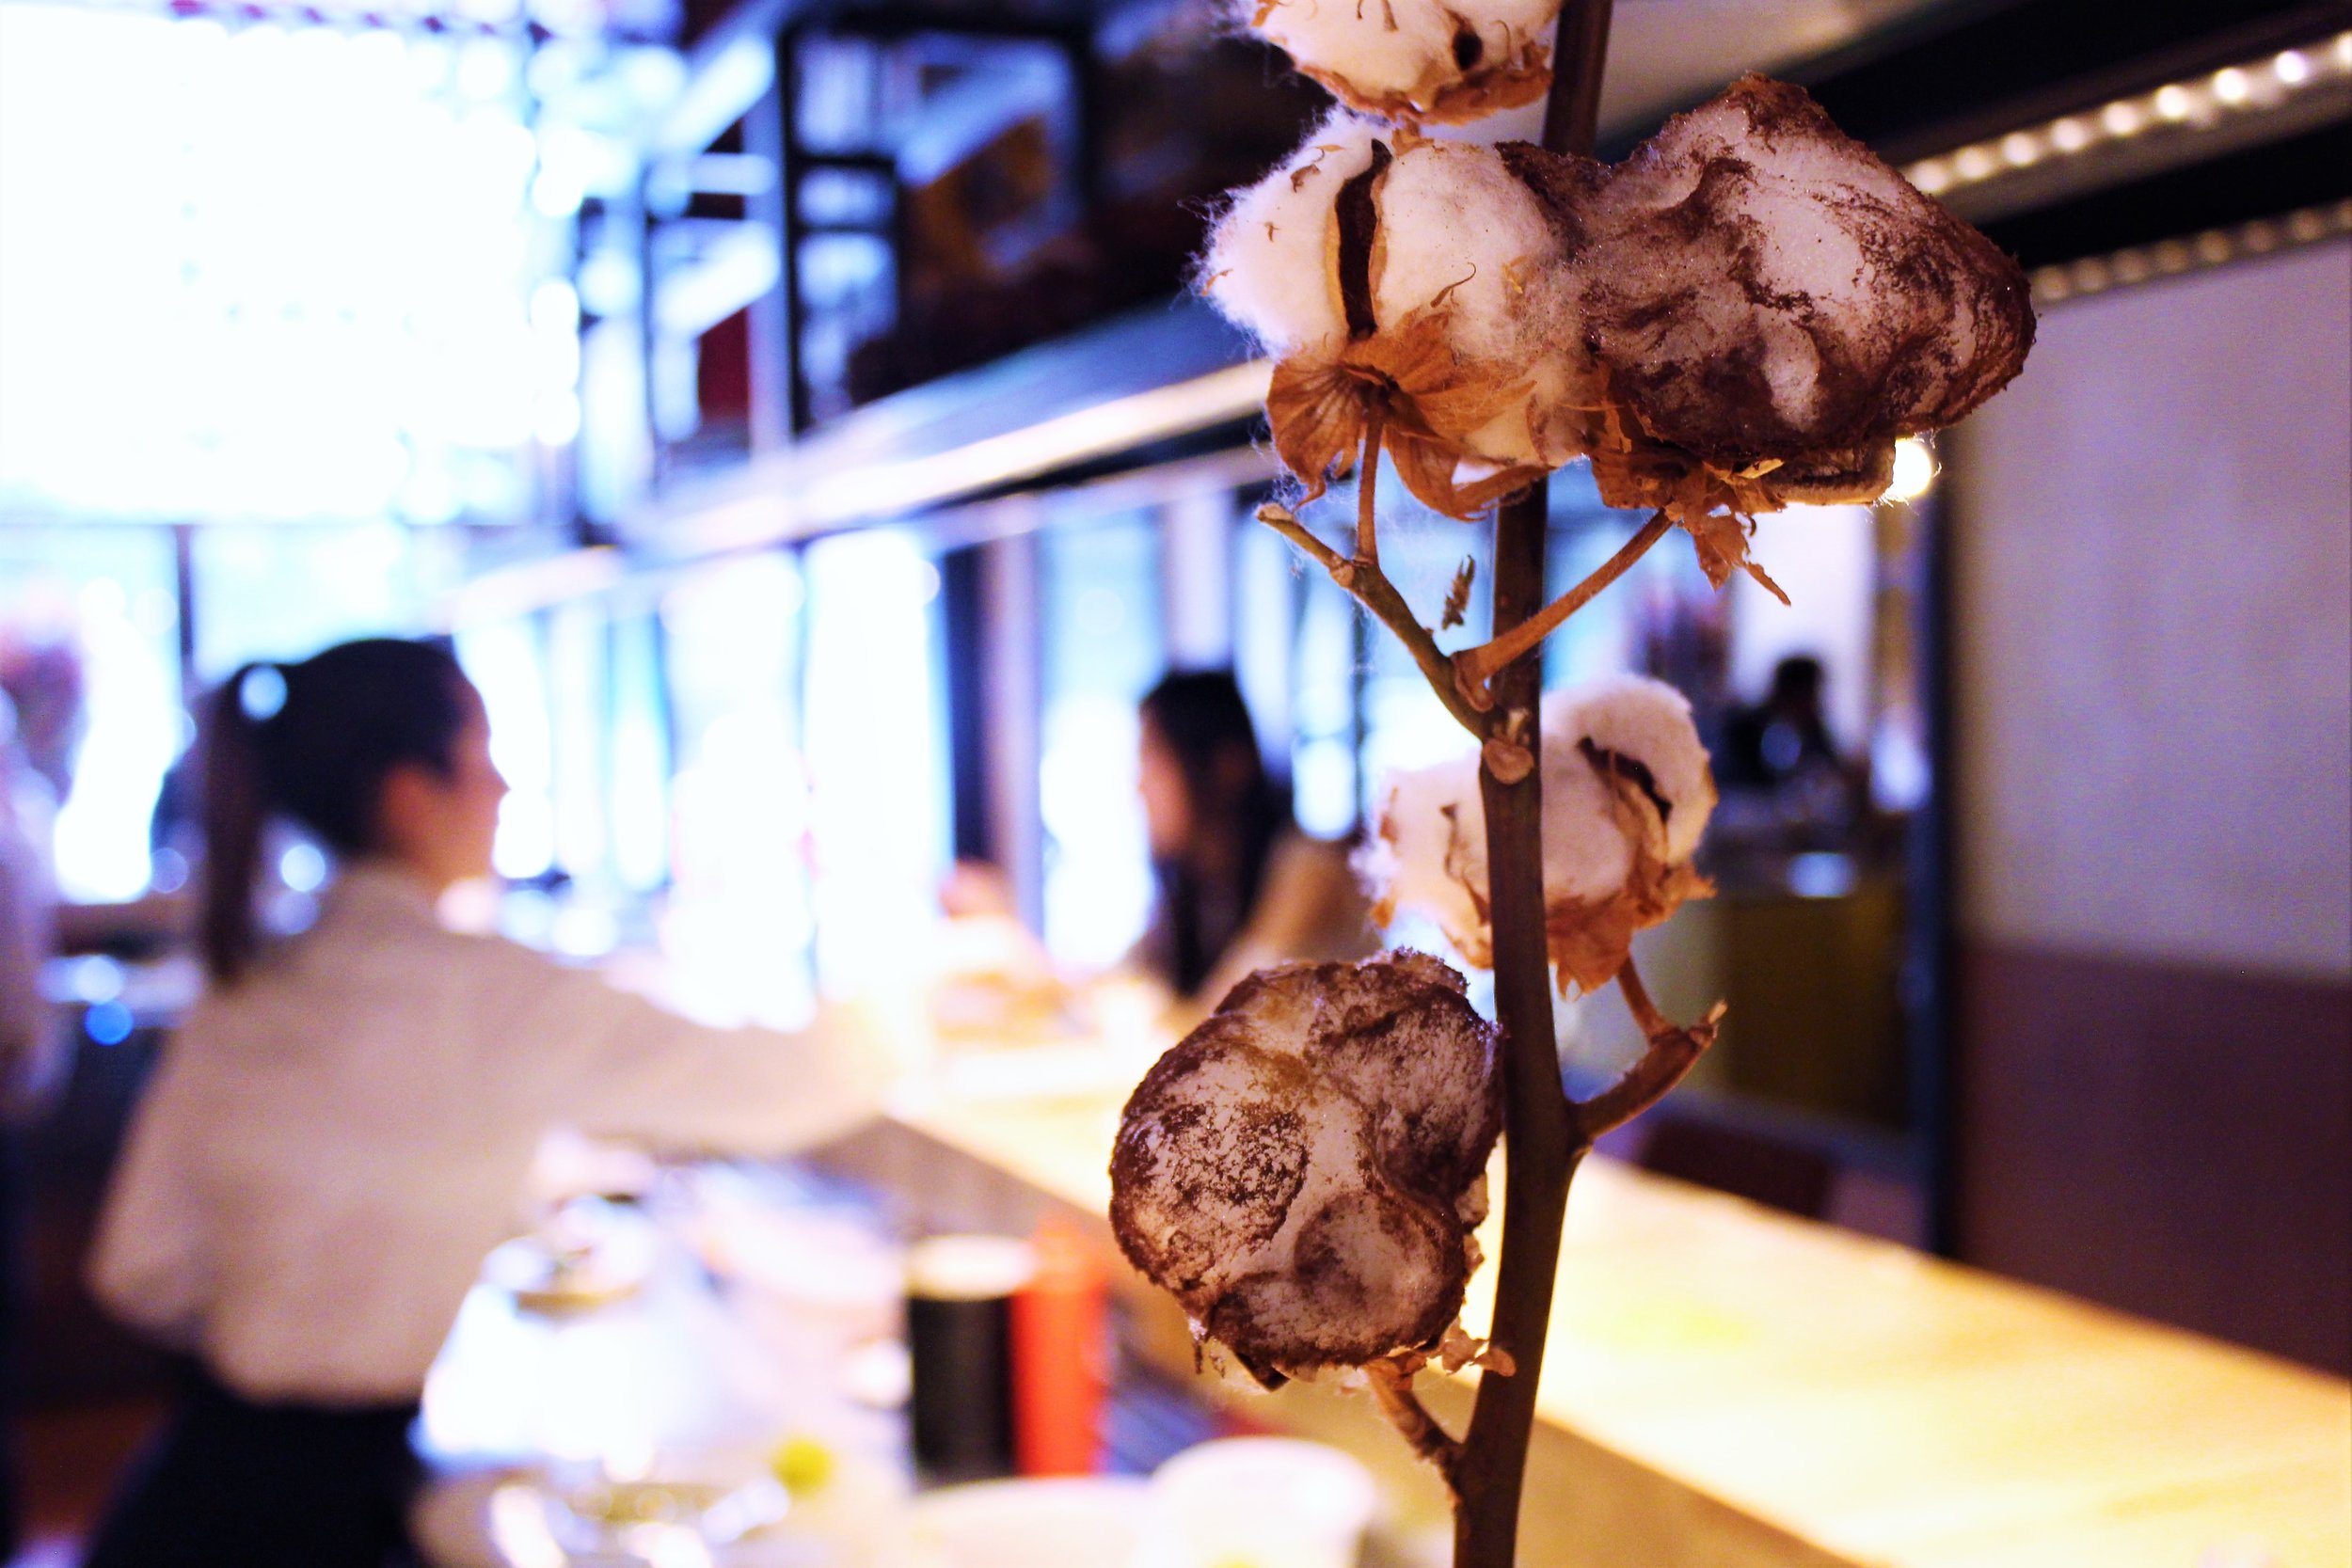 Cotton of Cocoa and Mint at Disfrutar in Barcelona